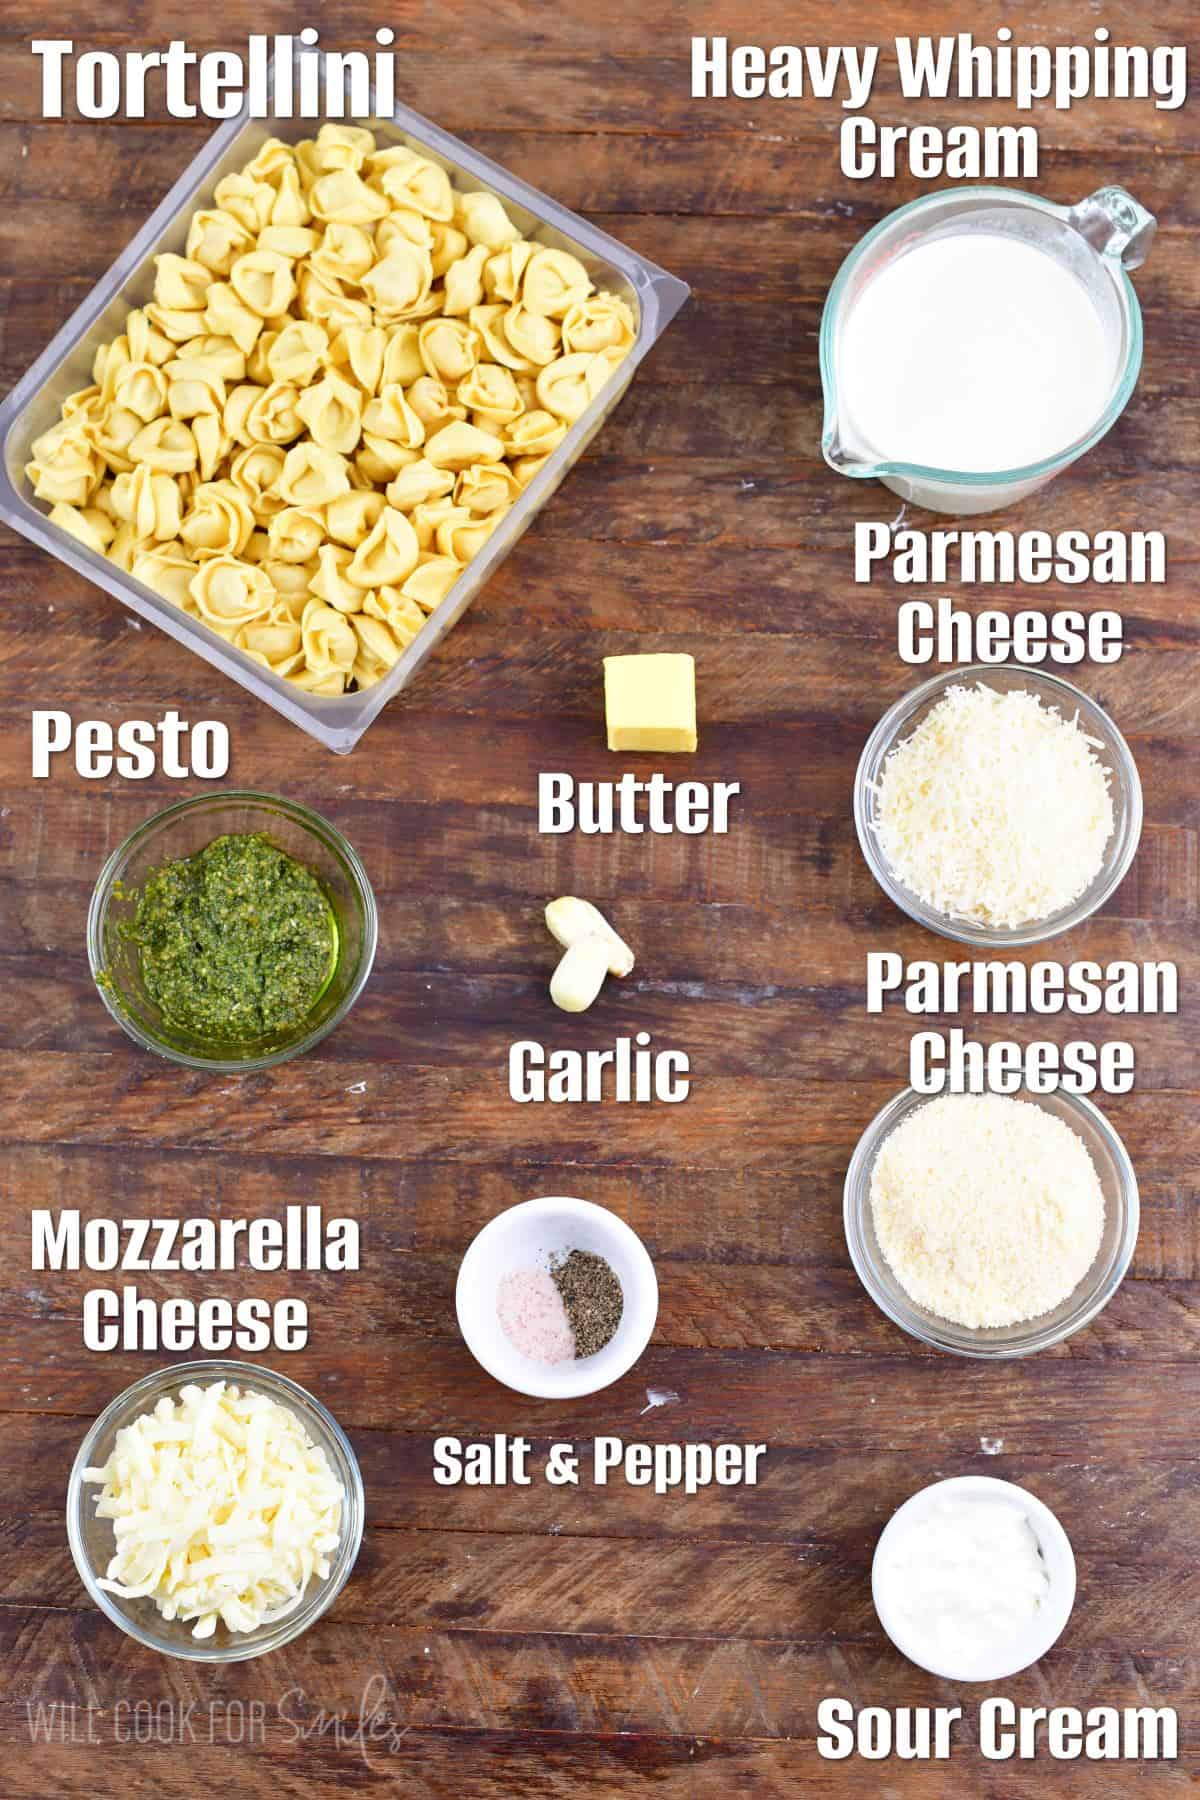 Labeled ingredients for pesto alfredo tortellini on a wood surface.